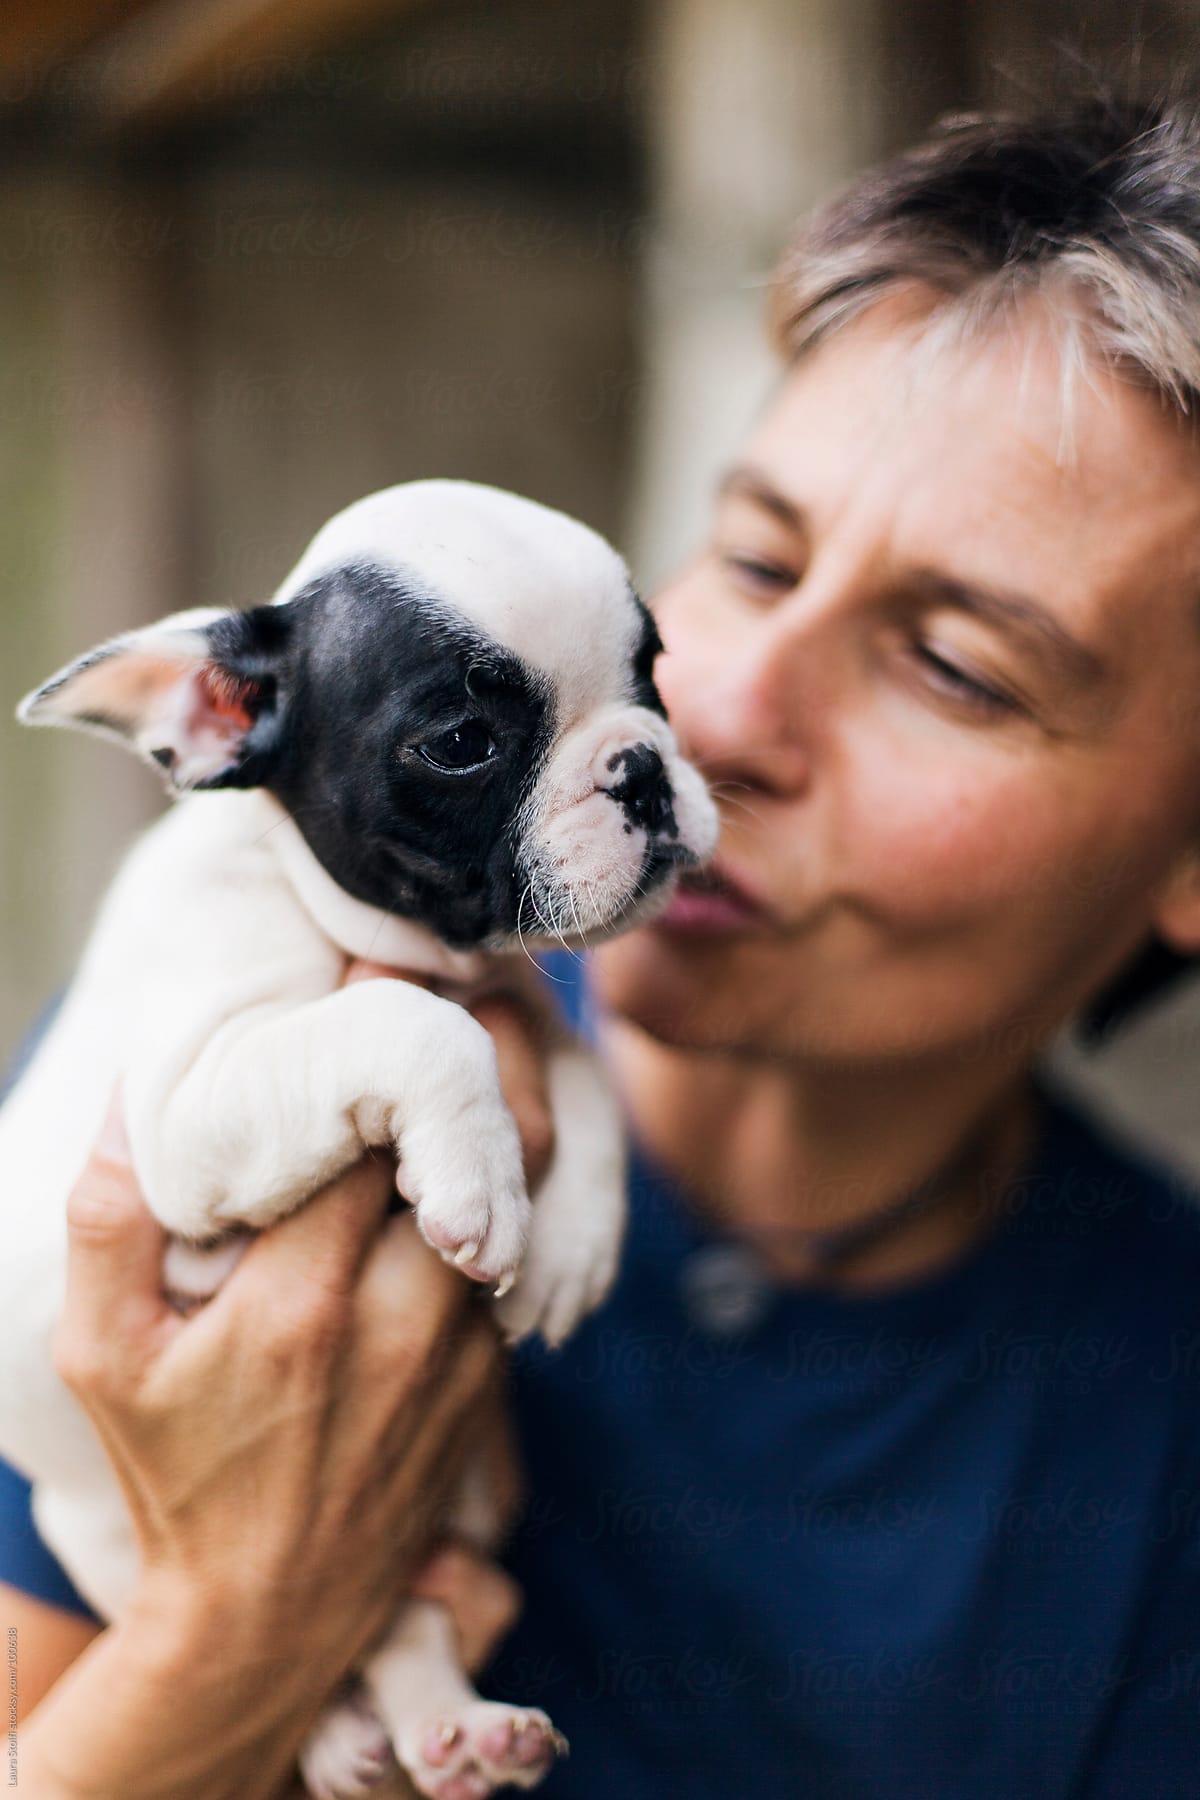 Woman holding in her hands and cuddling a black and white French Bulldog pup